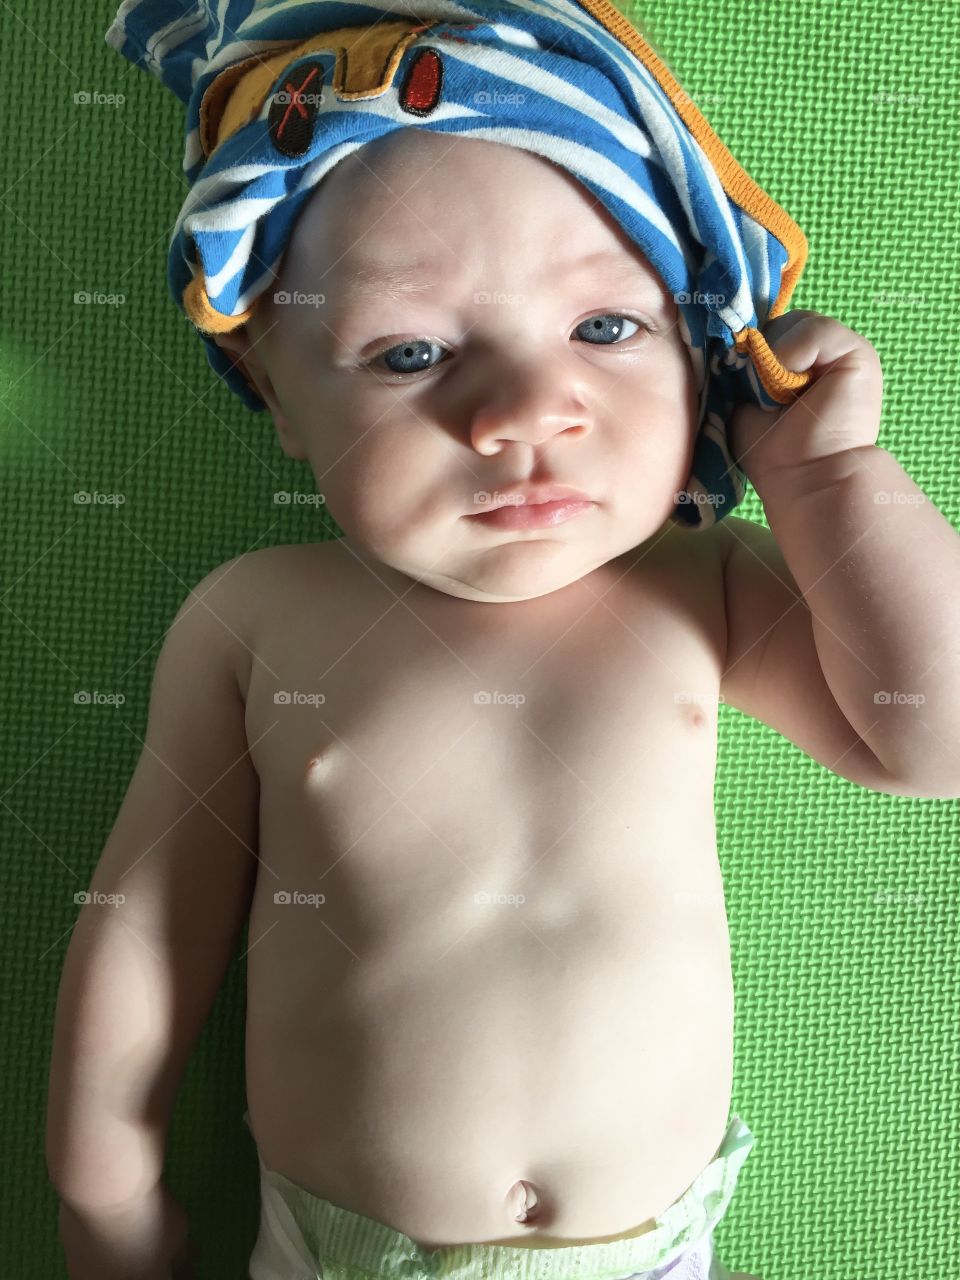 Cute baby boy not amused with clothing on head